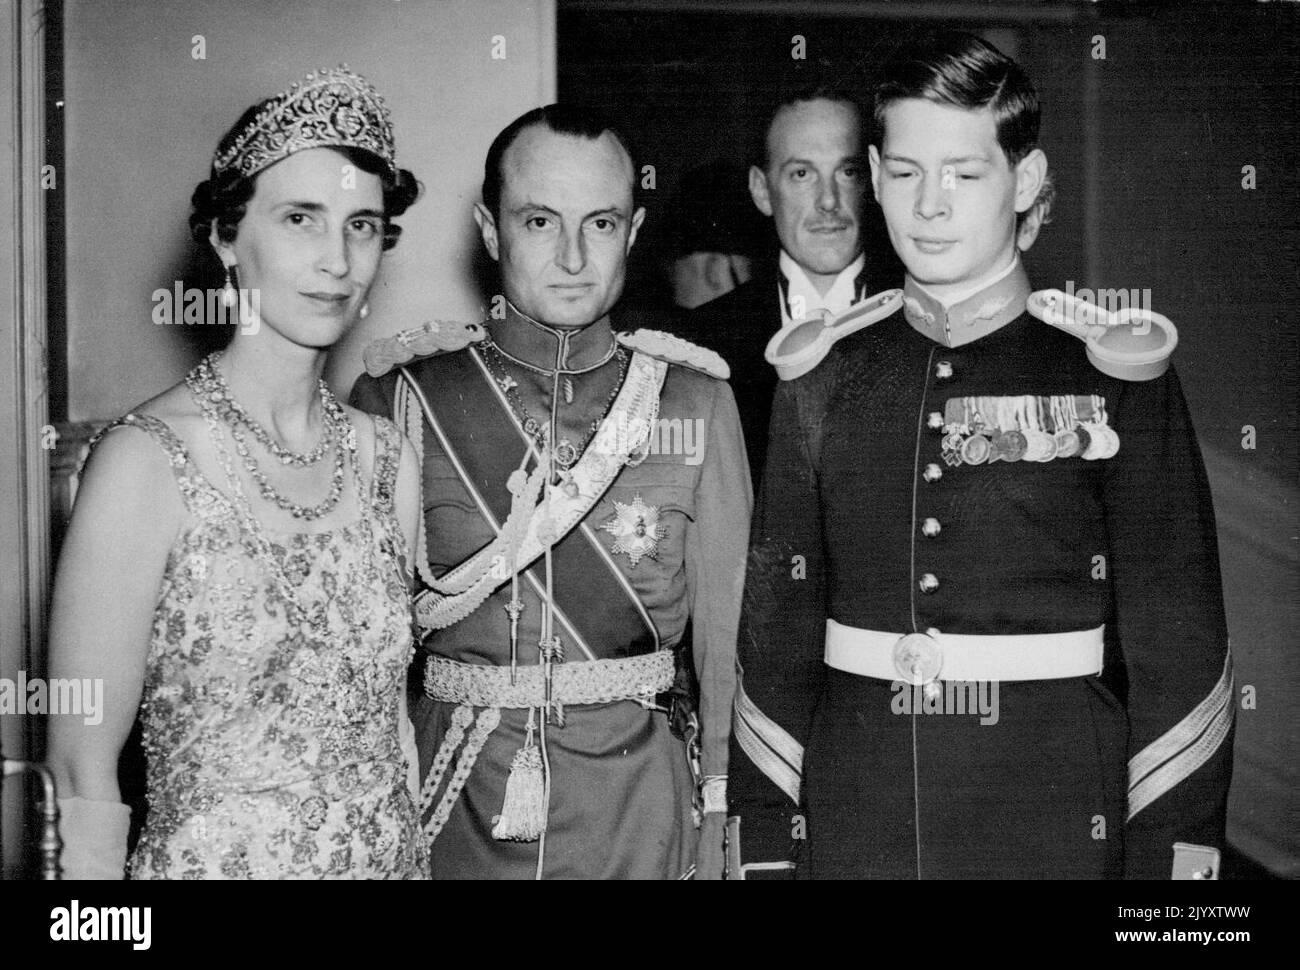 Coronation Ball at the Albert Hall Photo Shows: Prince and Princess Paul of Yugoslavia with Crown Prince Michael of Romania (right) seen at the Ball. A coronation costume ball was held at the Albert Hall tonight May 13. June 07, 1937. (Photo by Associated Press Photos) Stock Photo